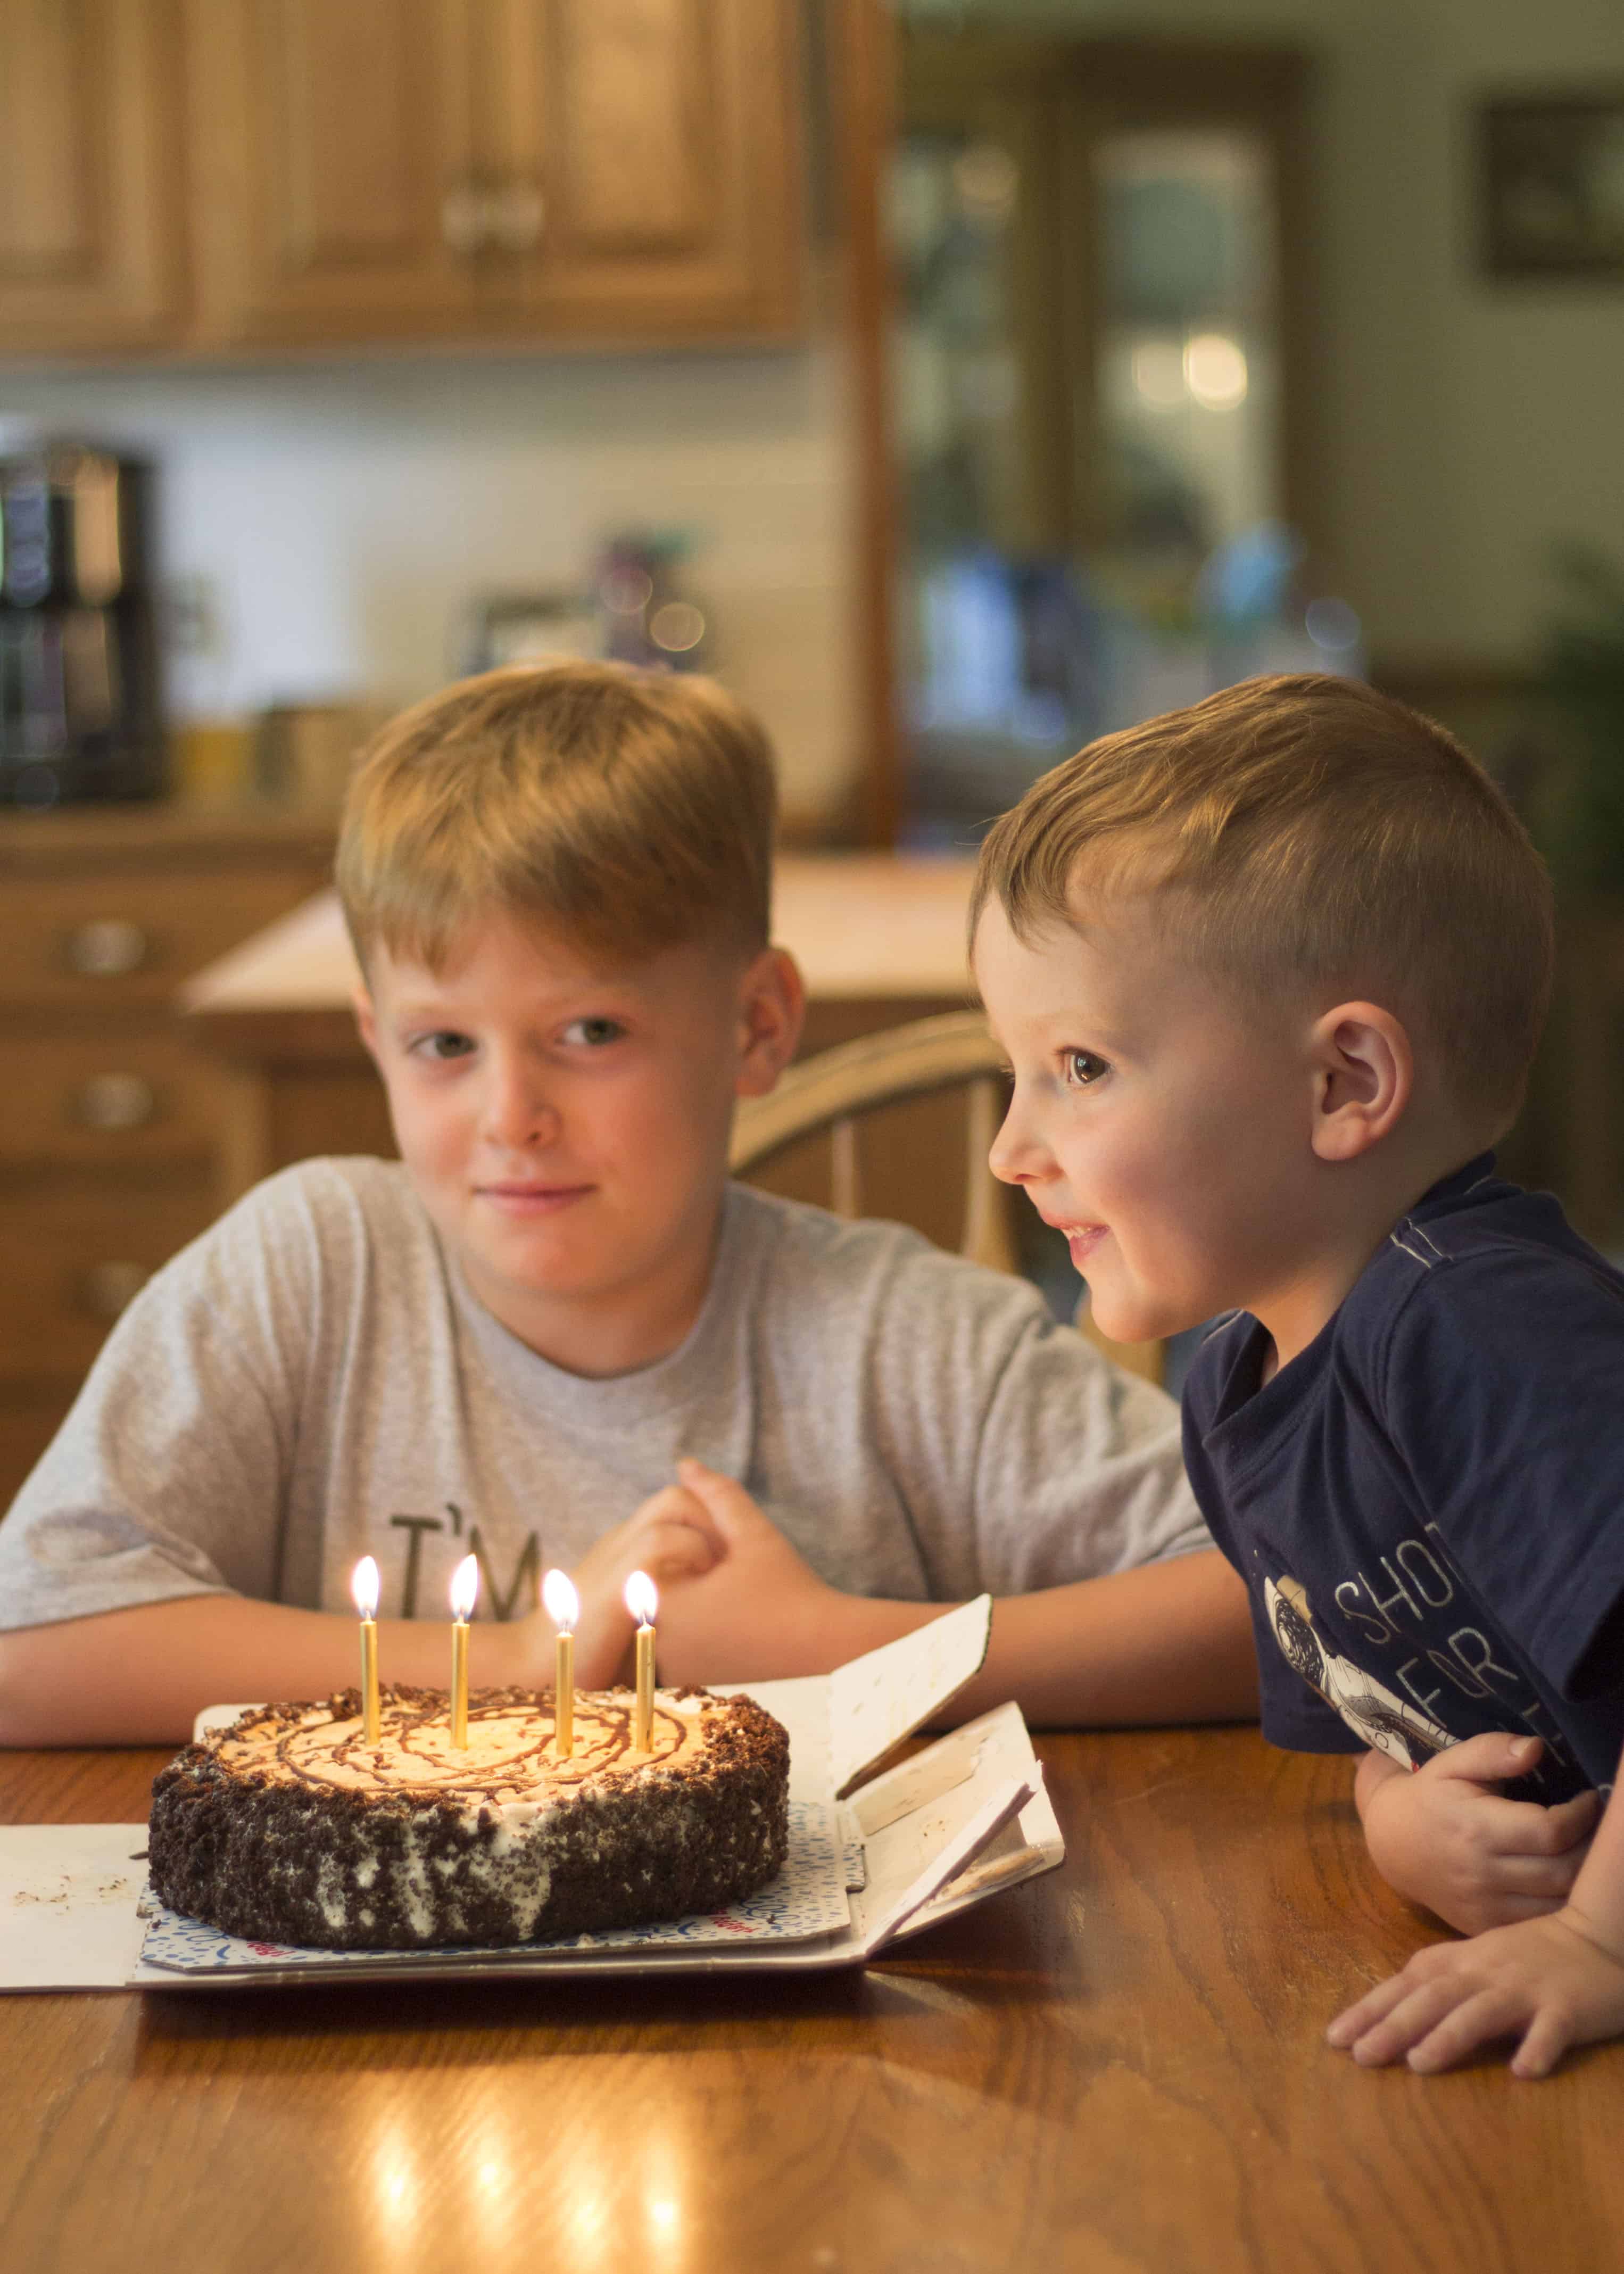 BROTHERS WITH BIRTHDAY CAKE